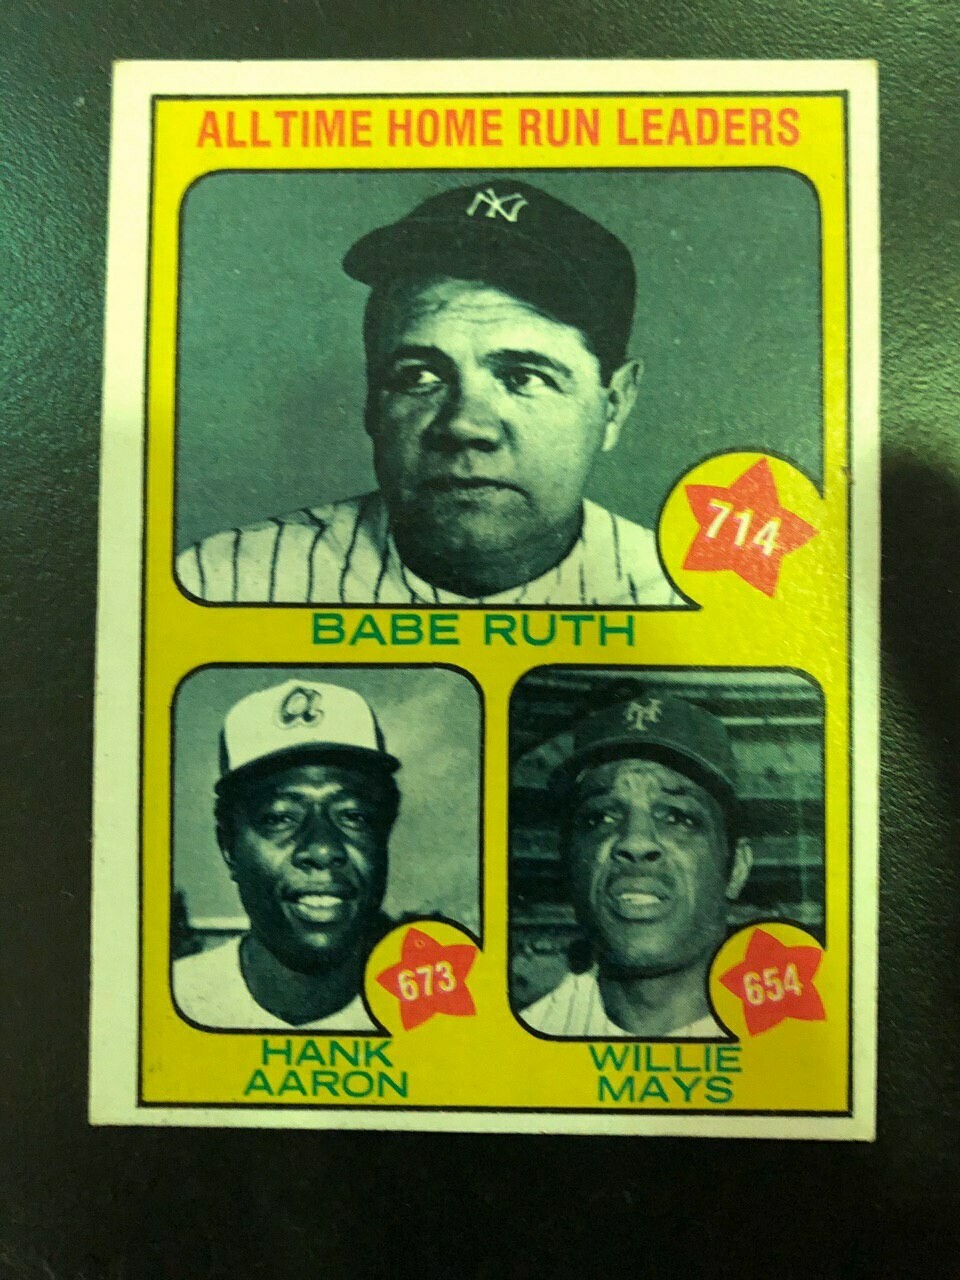 1973 Topps #1 All Time Home Run Leaders Ruth/Aaron/Mays List $60, Sell $45